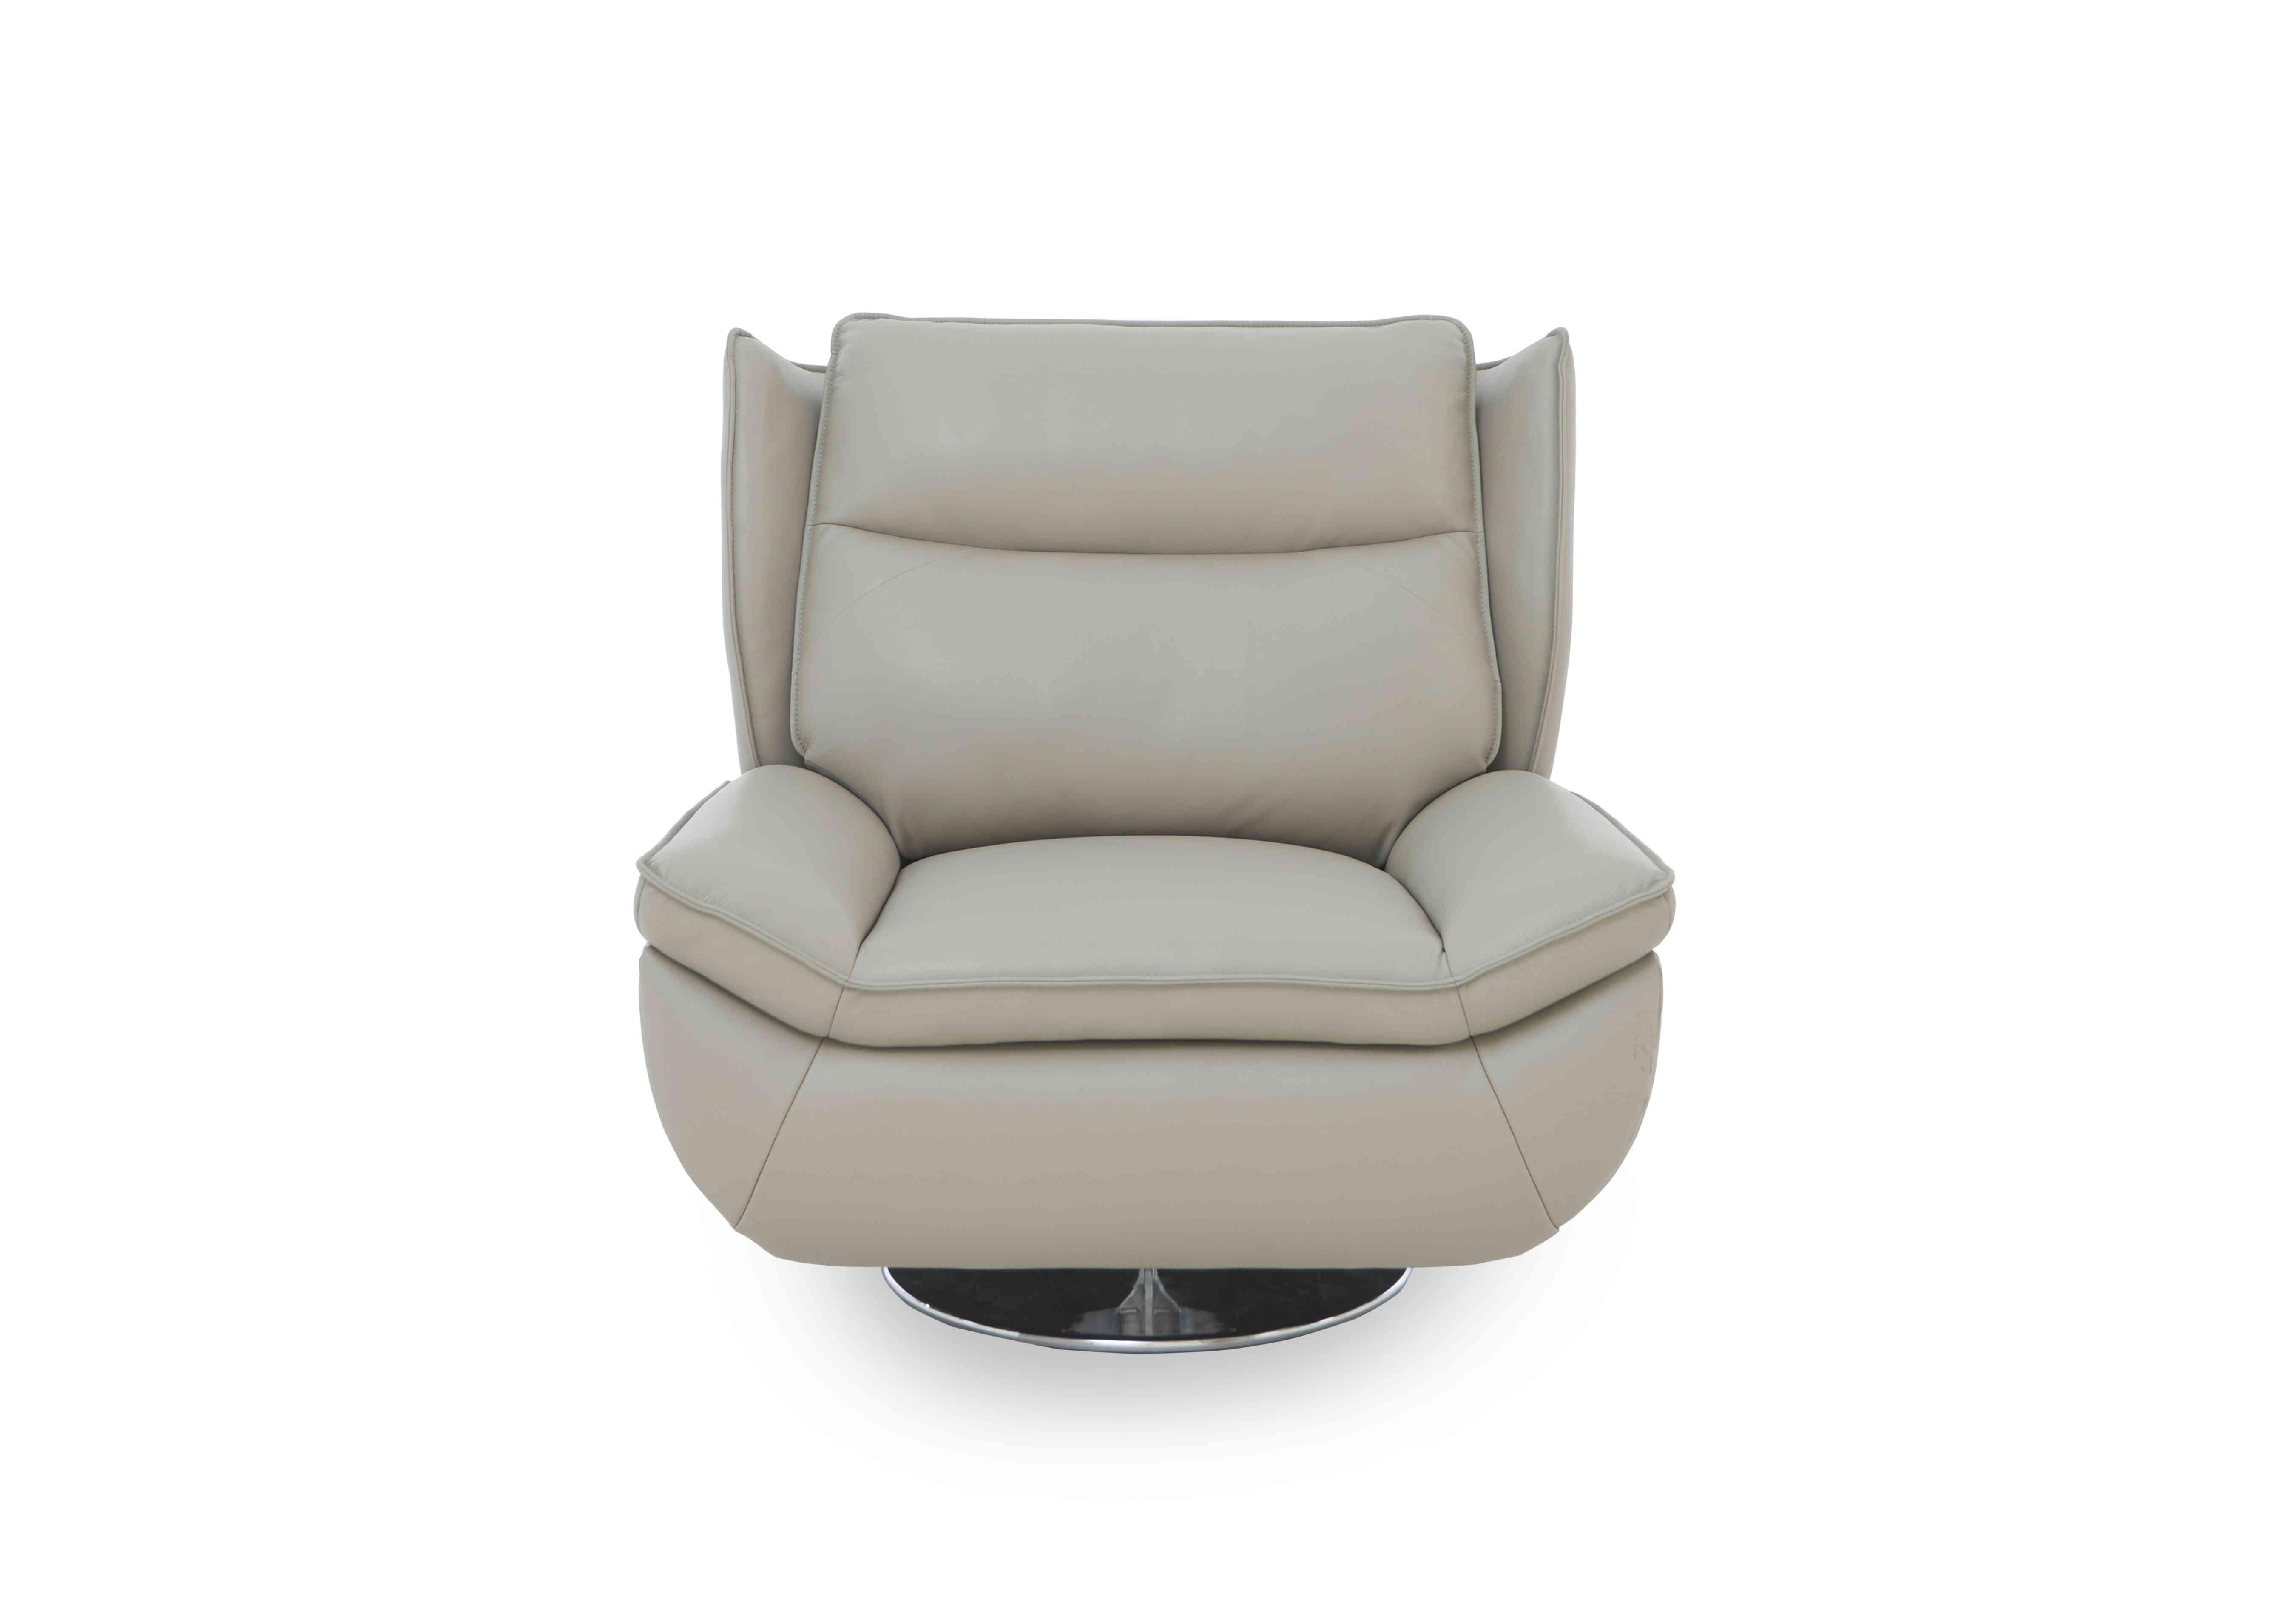 Vinny Leather Swivel Chair in Cat-60/23 Lead Grey on Furniture Village